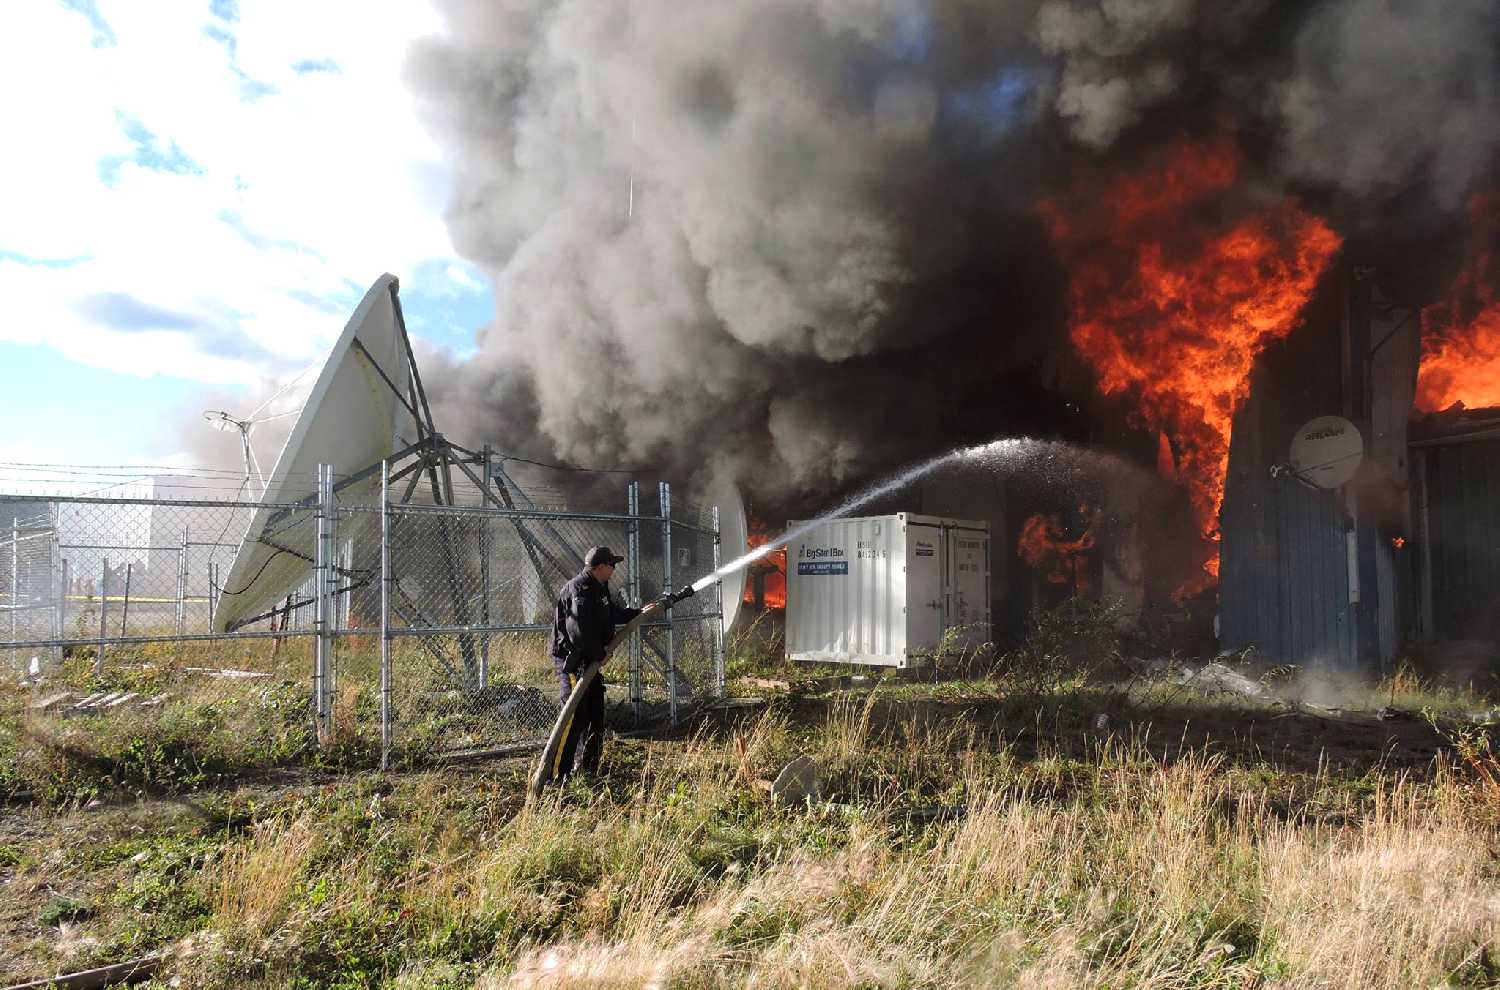 Shamattawa RCMP Sgt. Ryan Merasty assisted in putting out fire at Shamattawa Northern Store and Band Office Sept 22